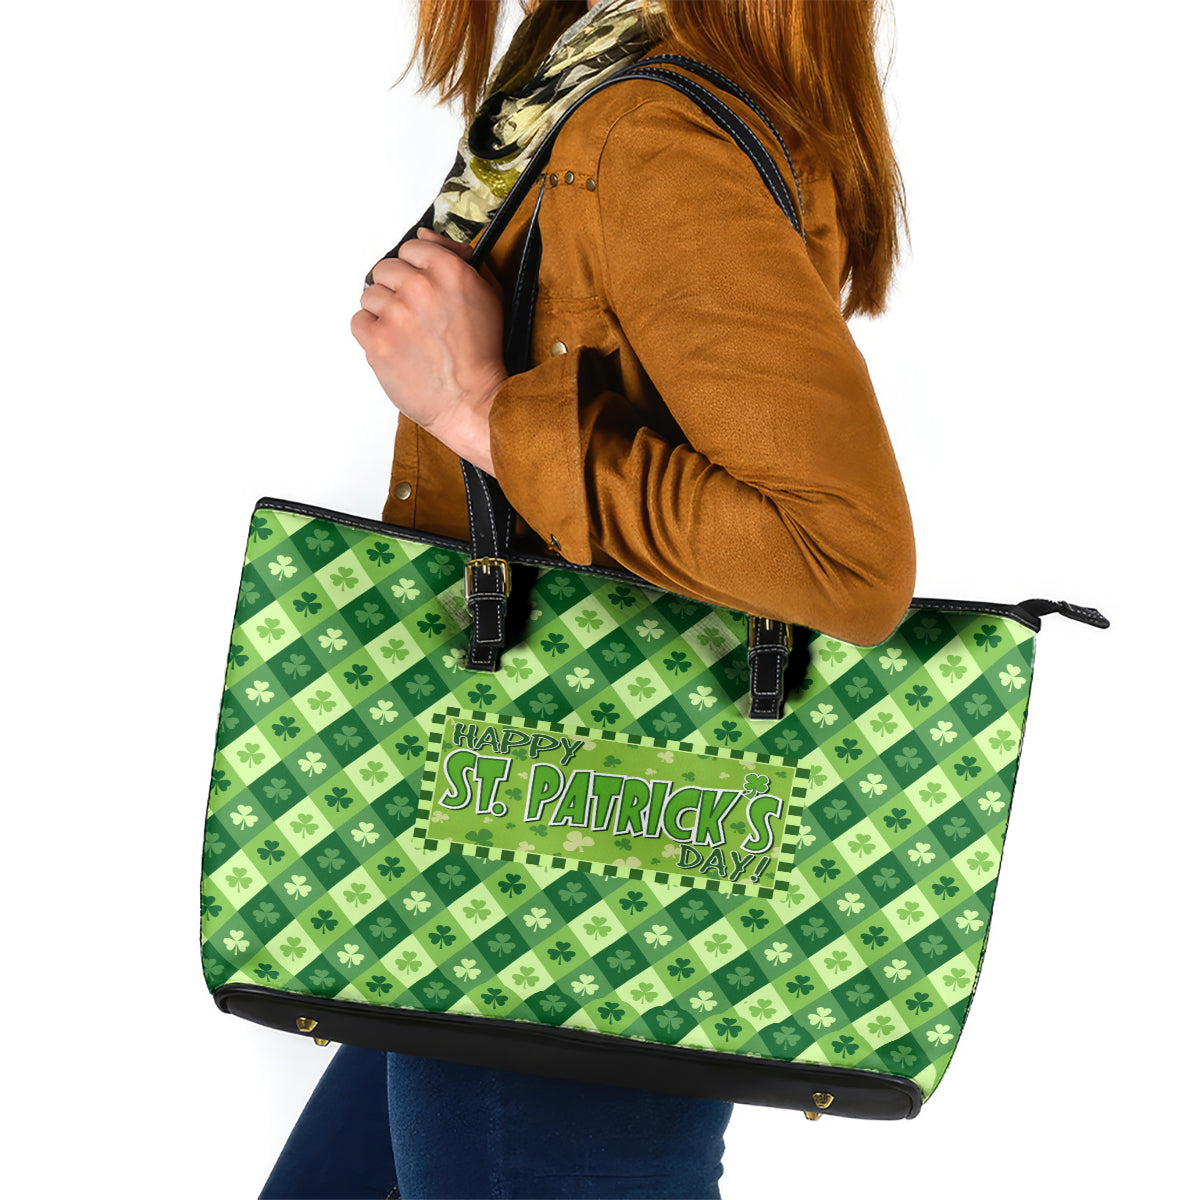 Irish St Patrick's Day Leather Tote Bag Simple Style